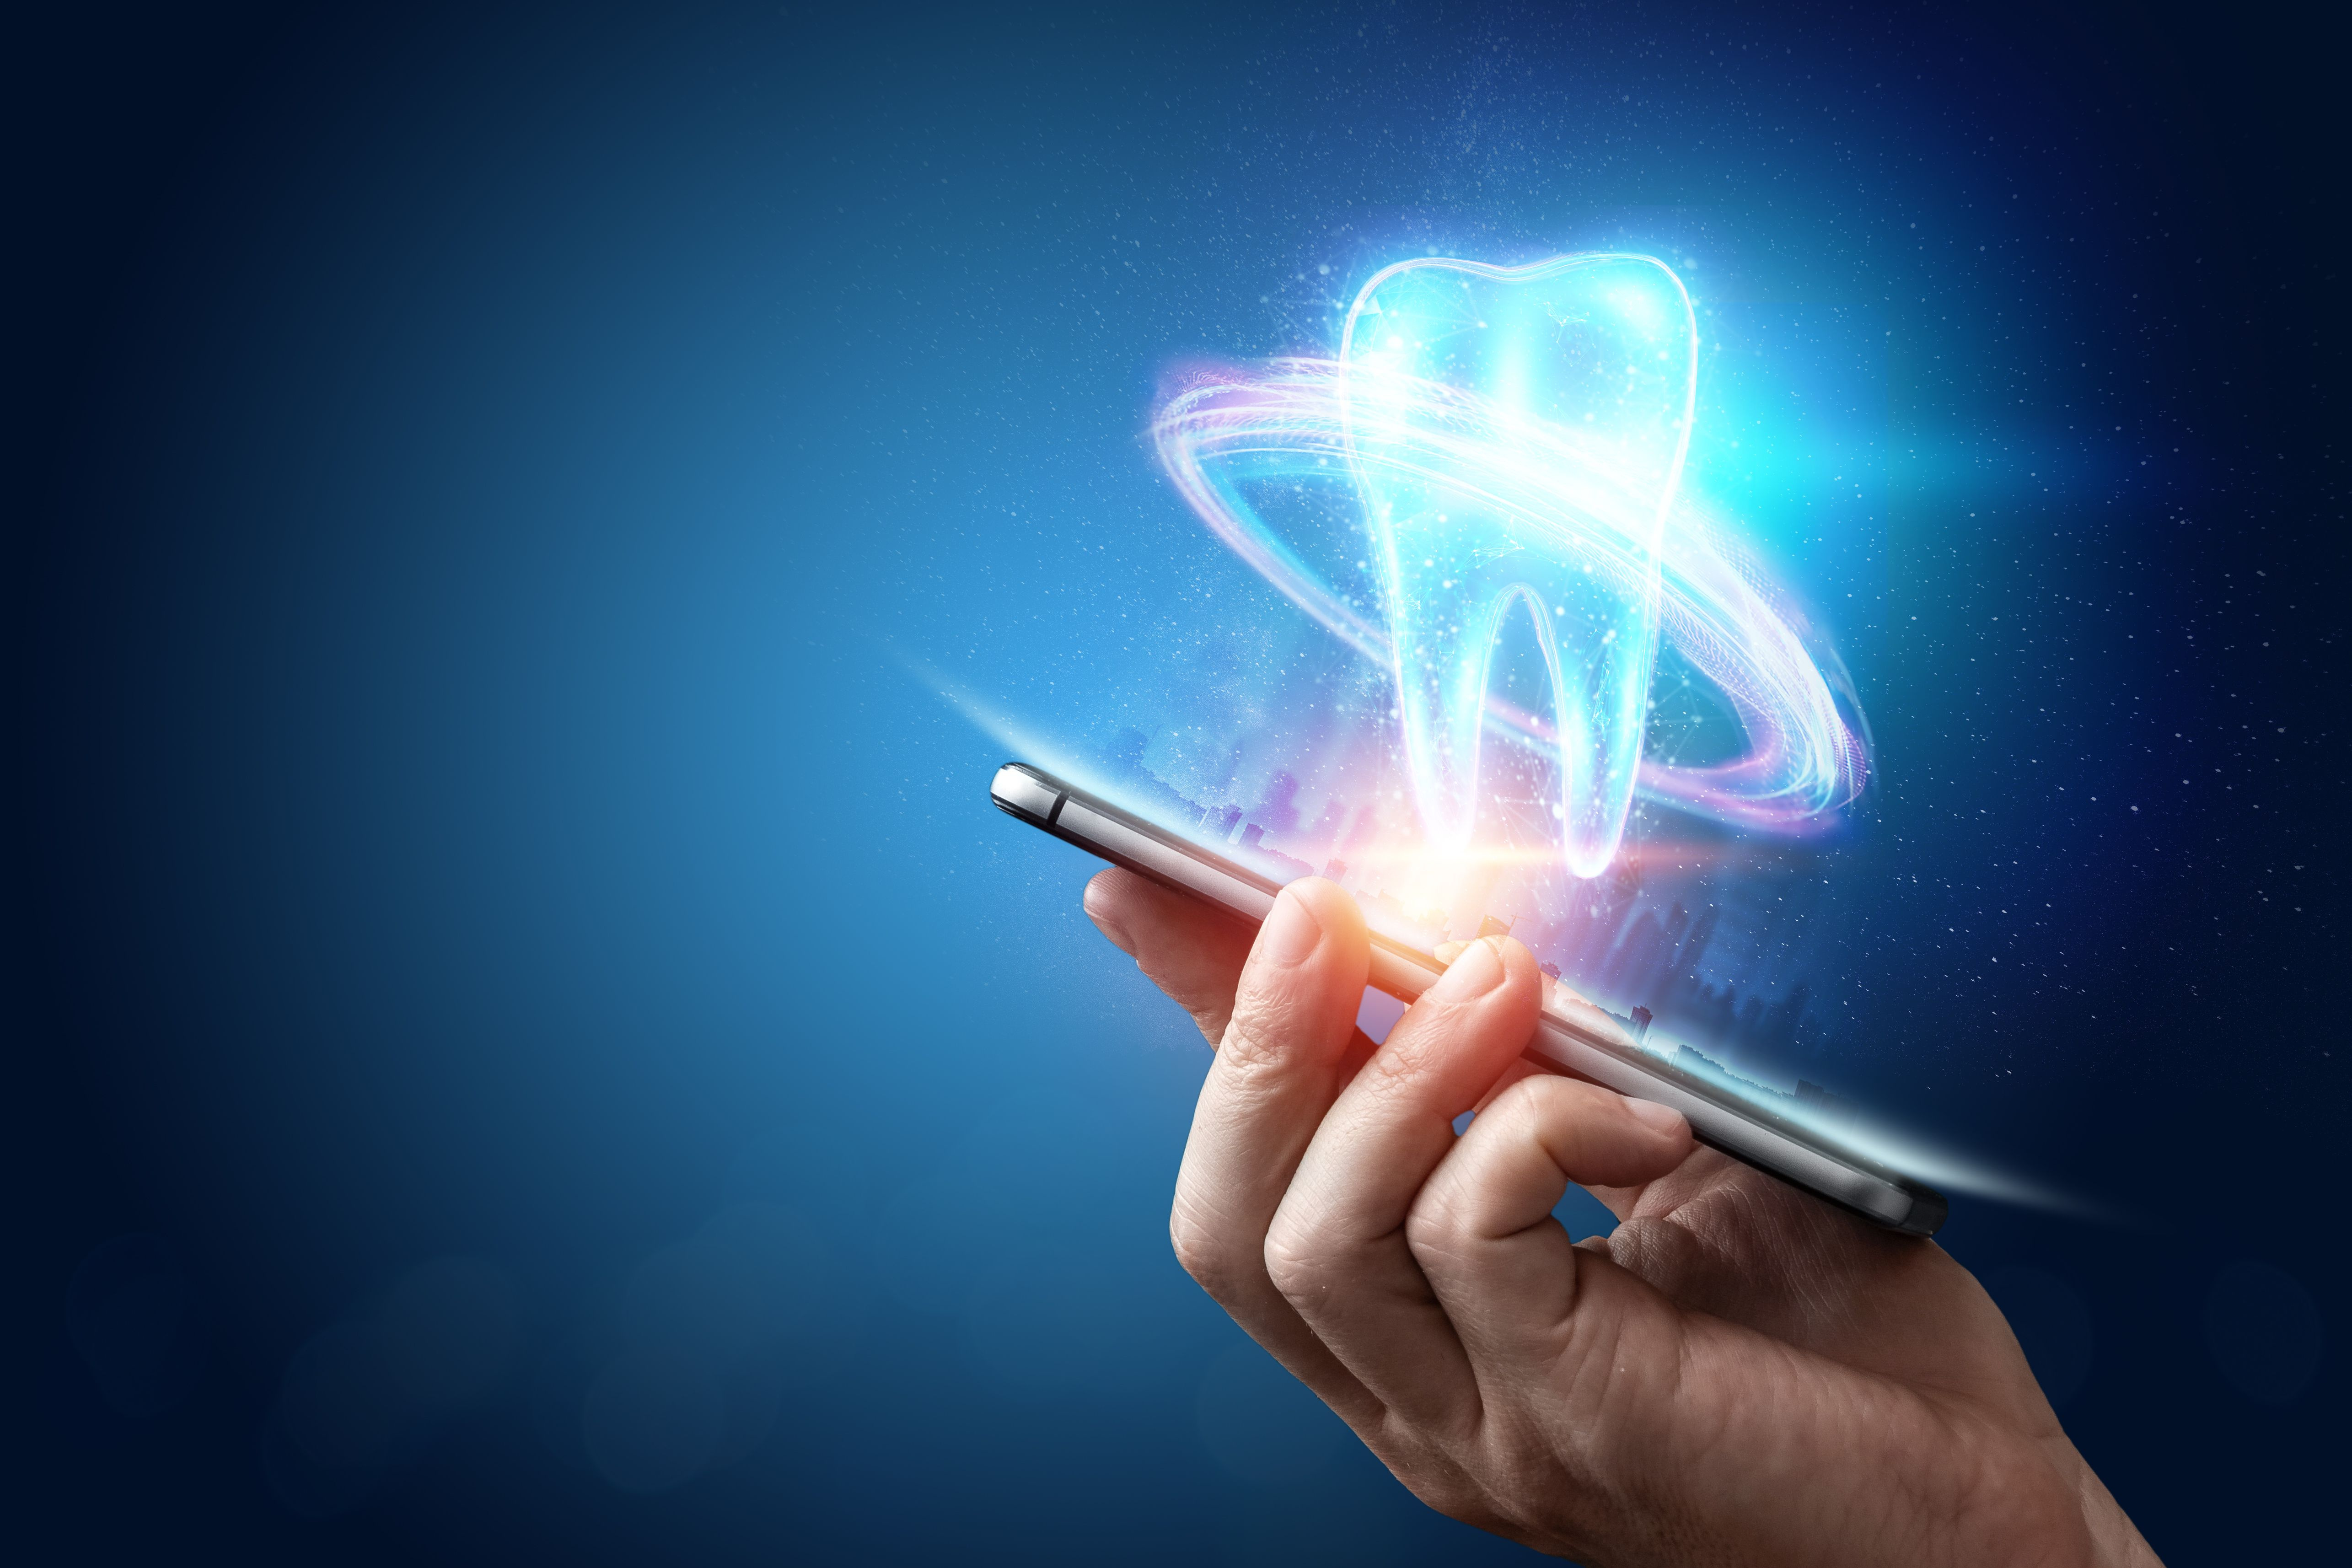 Smartphone sending out holographic image of a tooth.